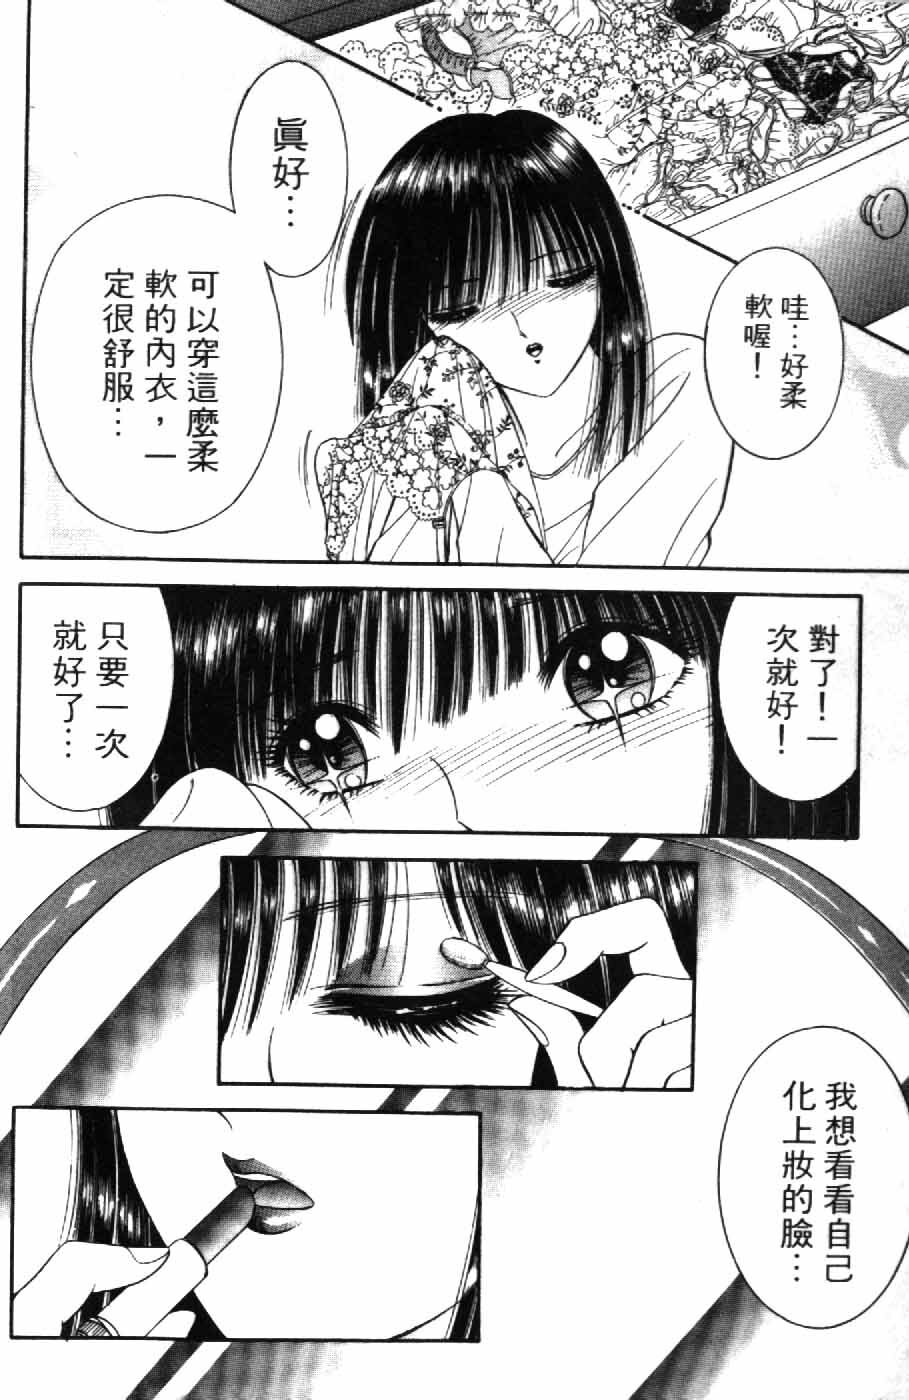 [Senno Knife] Ouma ga Horror Show 2 - Trans Sexual Special Show 2 | 顫慄博覽會 2 [Chinese] page 8 full